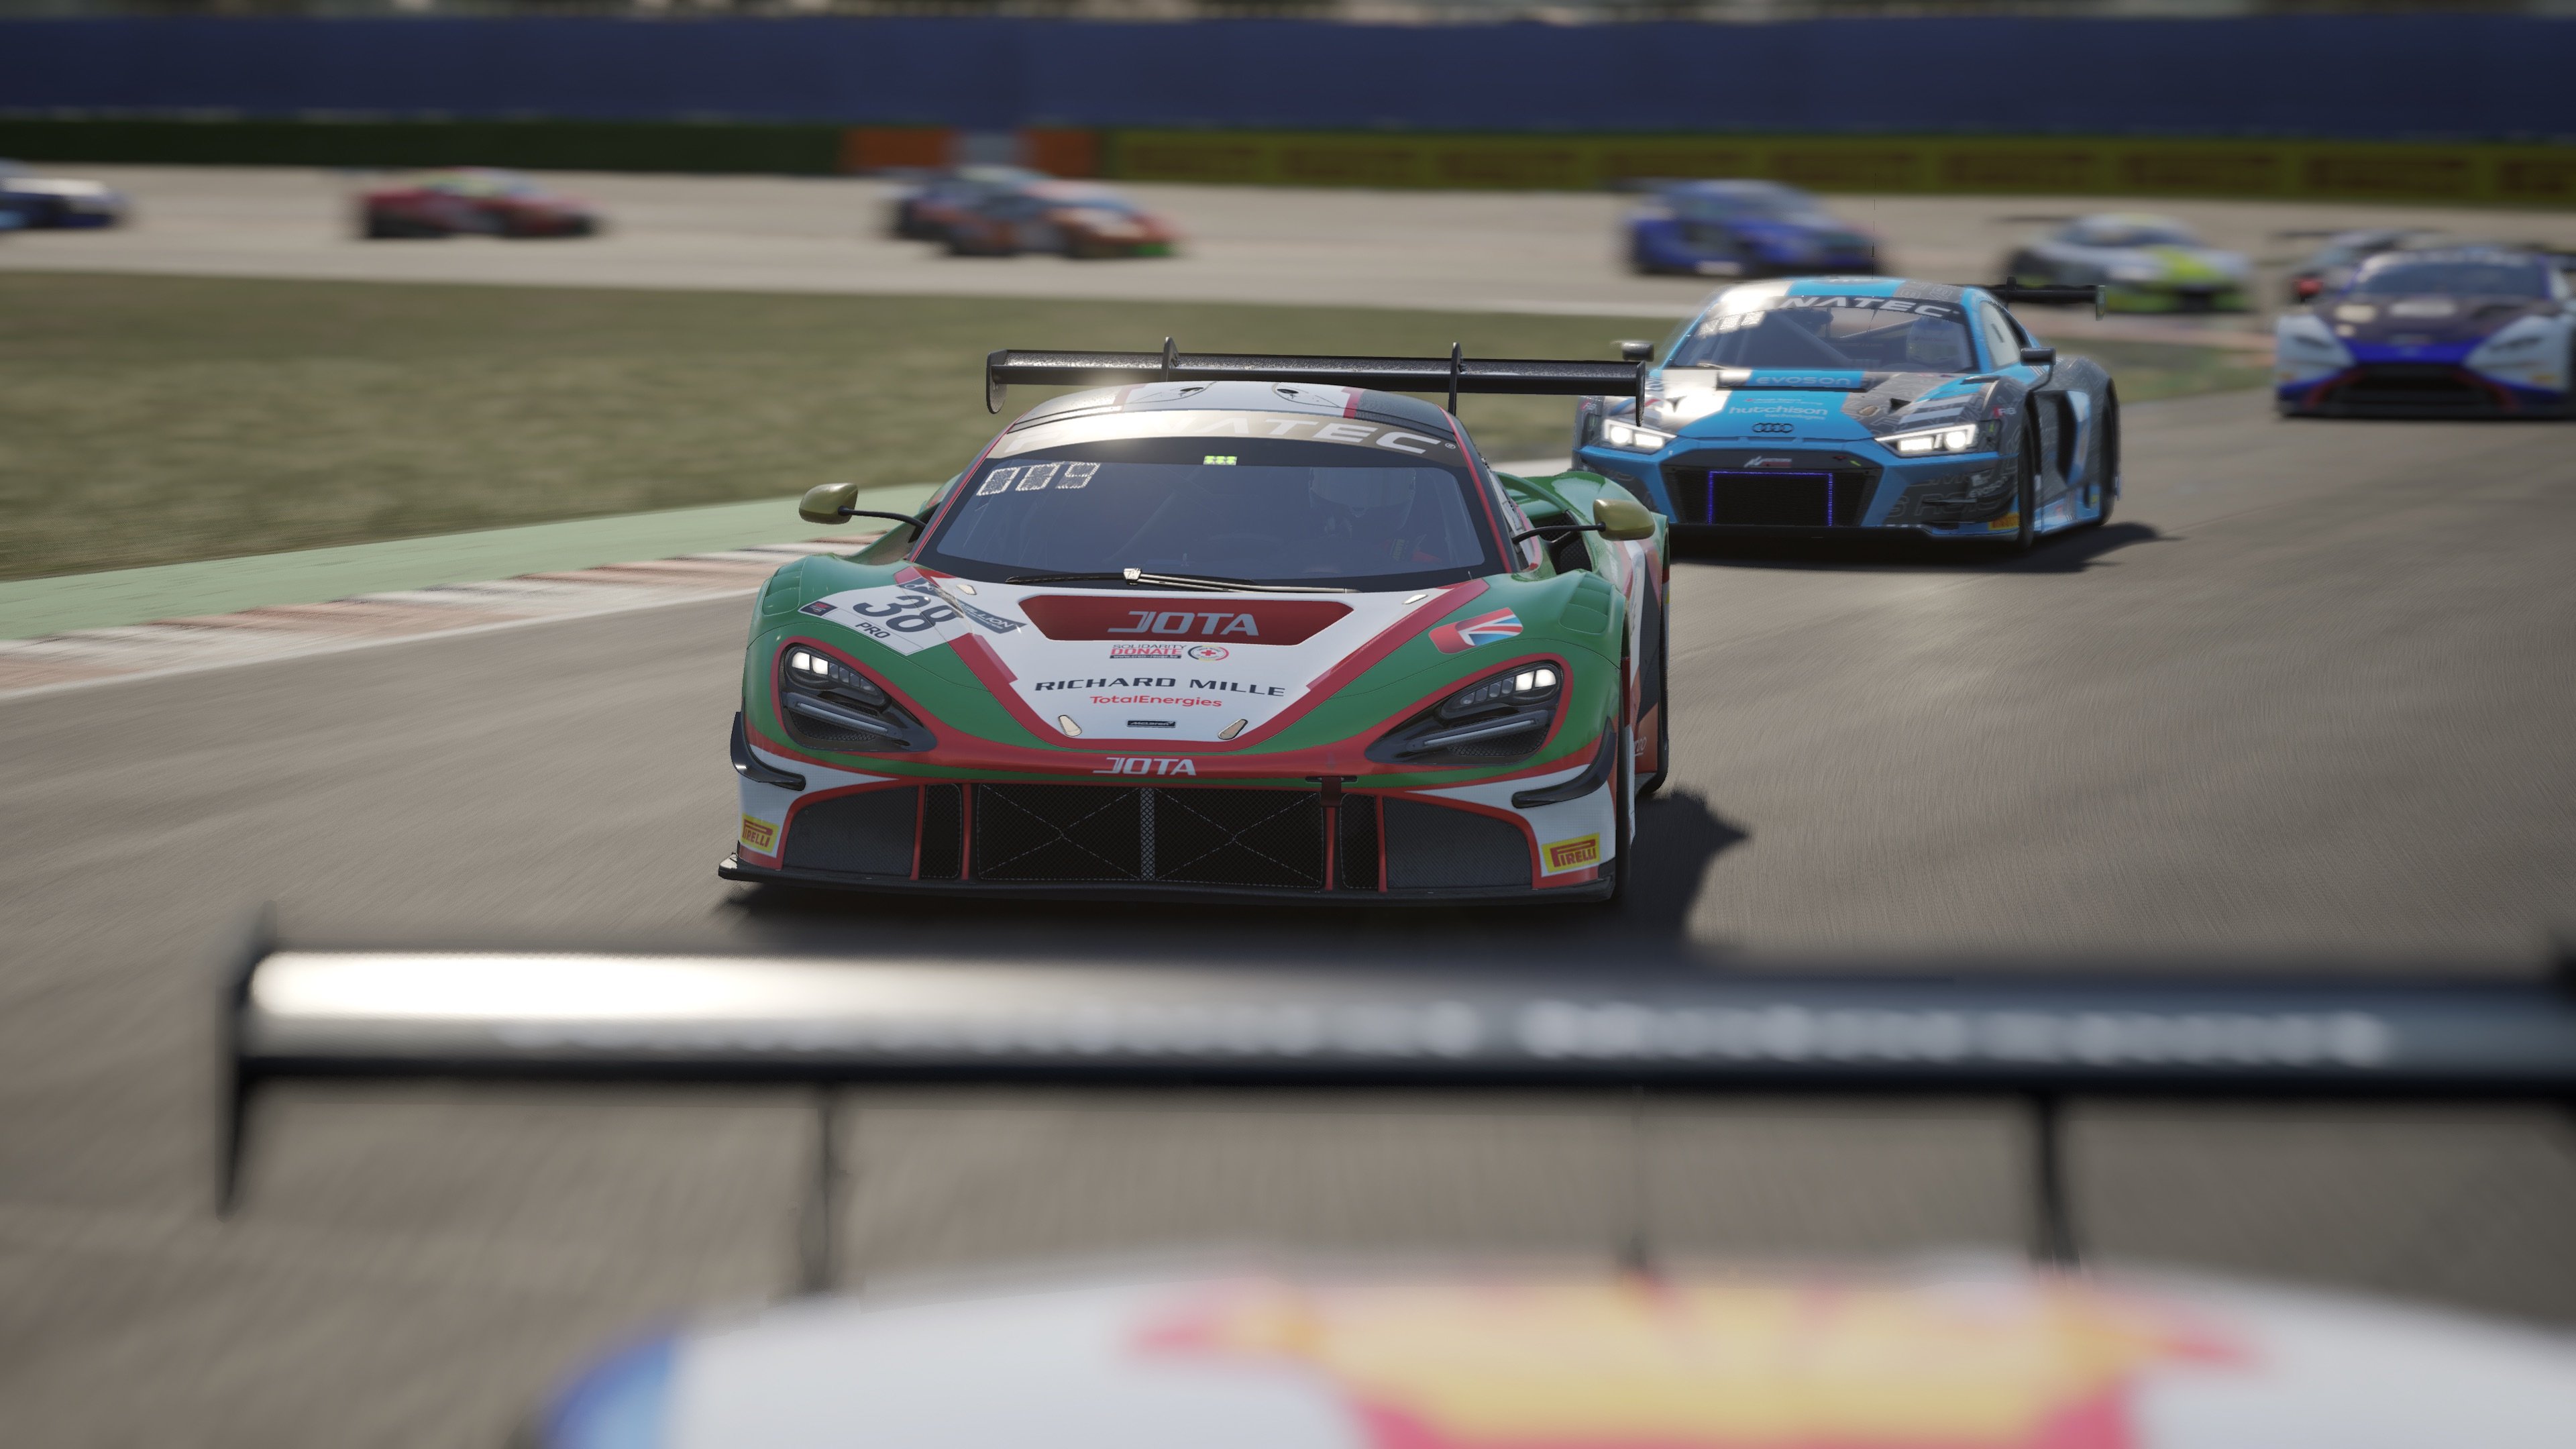 ESPORTS: Ultimate test awaits Assetto Corsa Competizione racers as